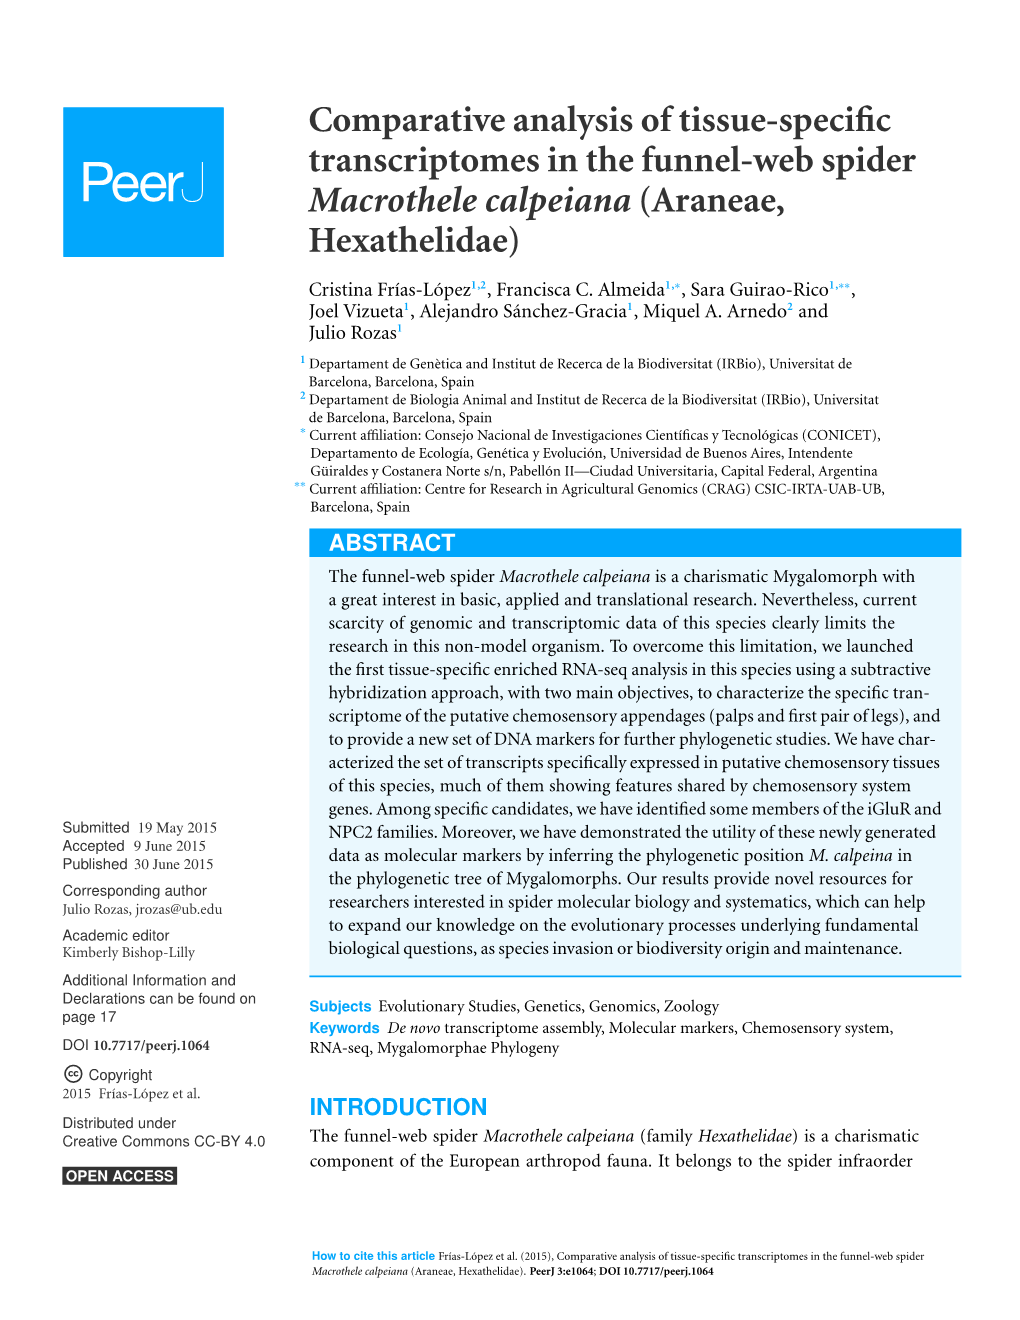 Comparative Analysis of Tissue-Specific Transcriptomes in the Funnel-Web Spider Macrothele Calpeiana (Araneae, Hexathelidae)